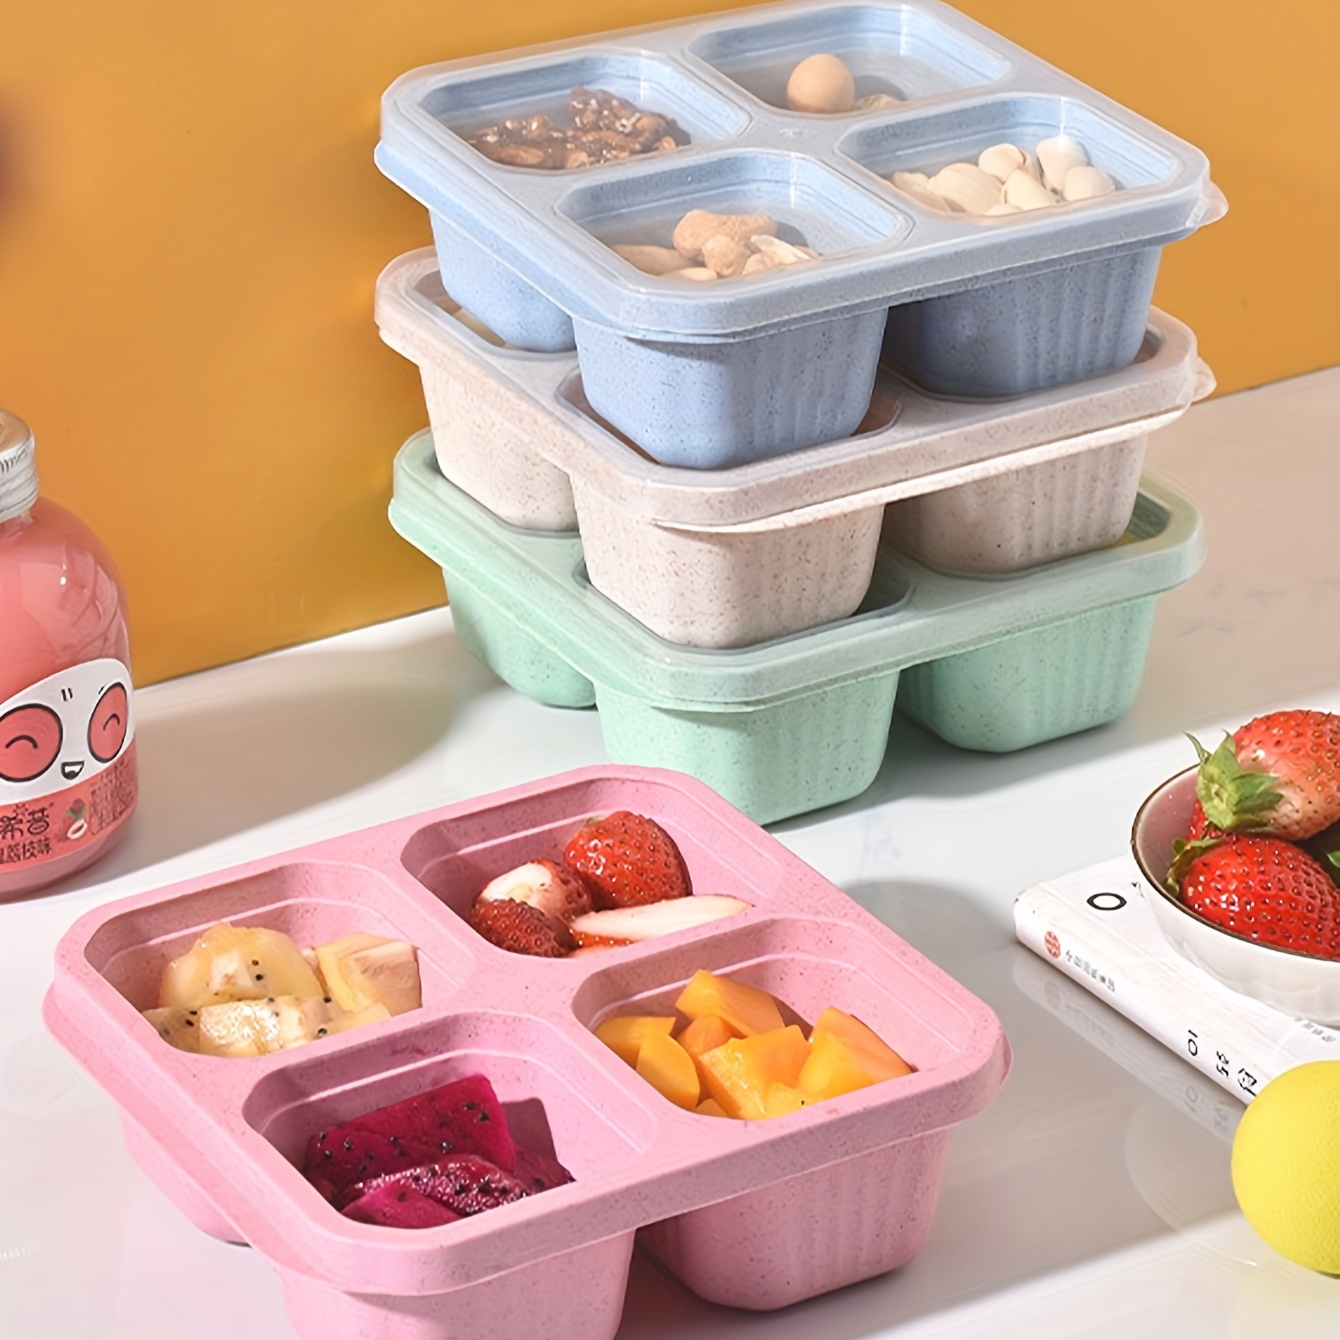 Meal Prep Containers, Reusable Meal Prep Containers, 2 Compartment